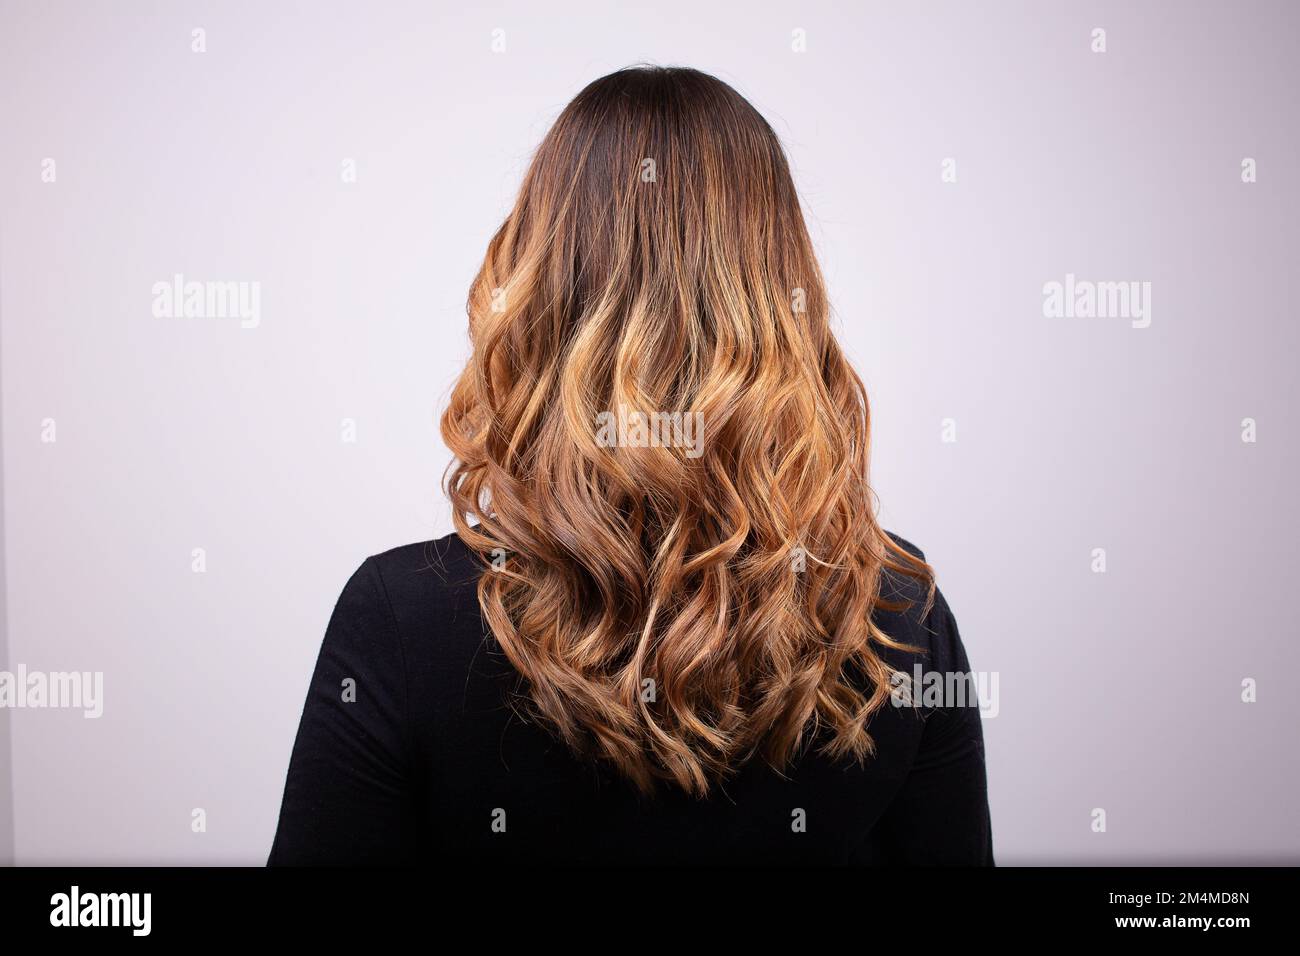 Back view portrait of beautiful curly dark blonde woman wearing black sweater. High quality photo Stock Photo